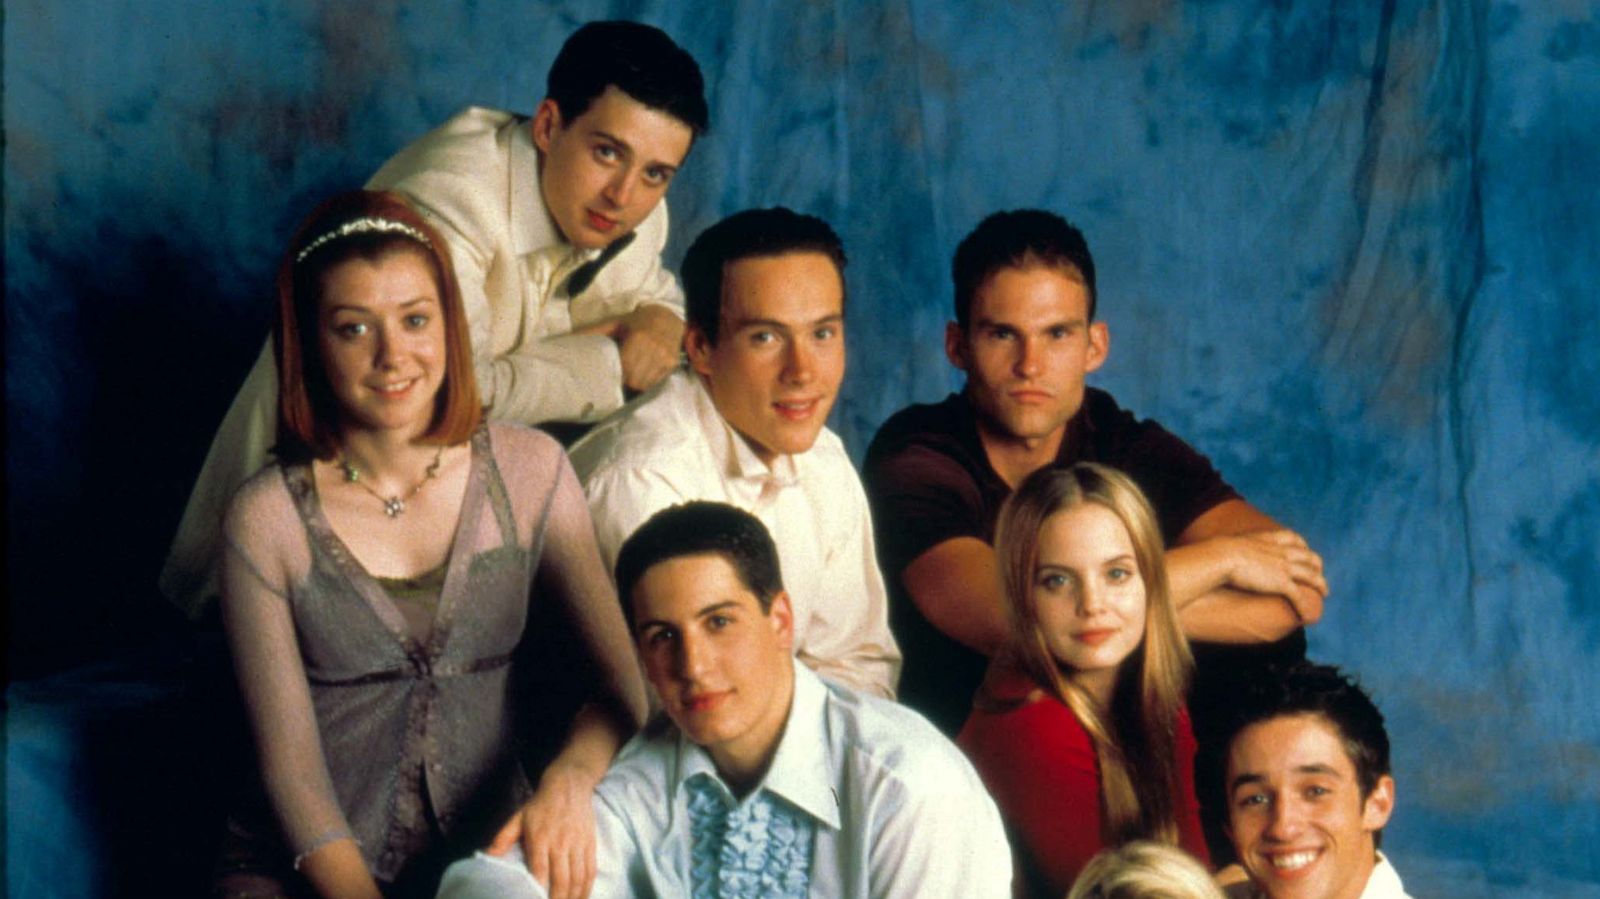 andy mal recommends american pie full cast pic